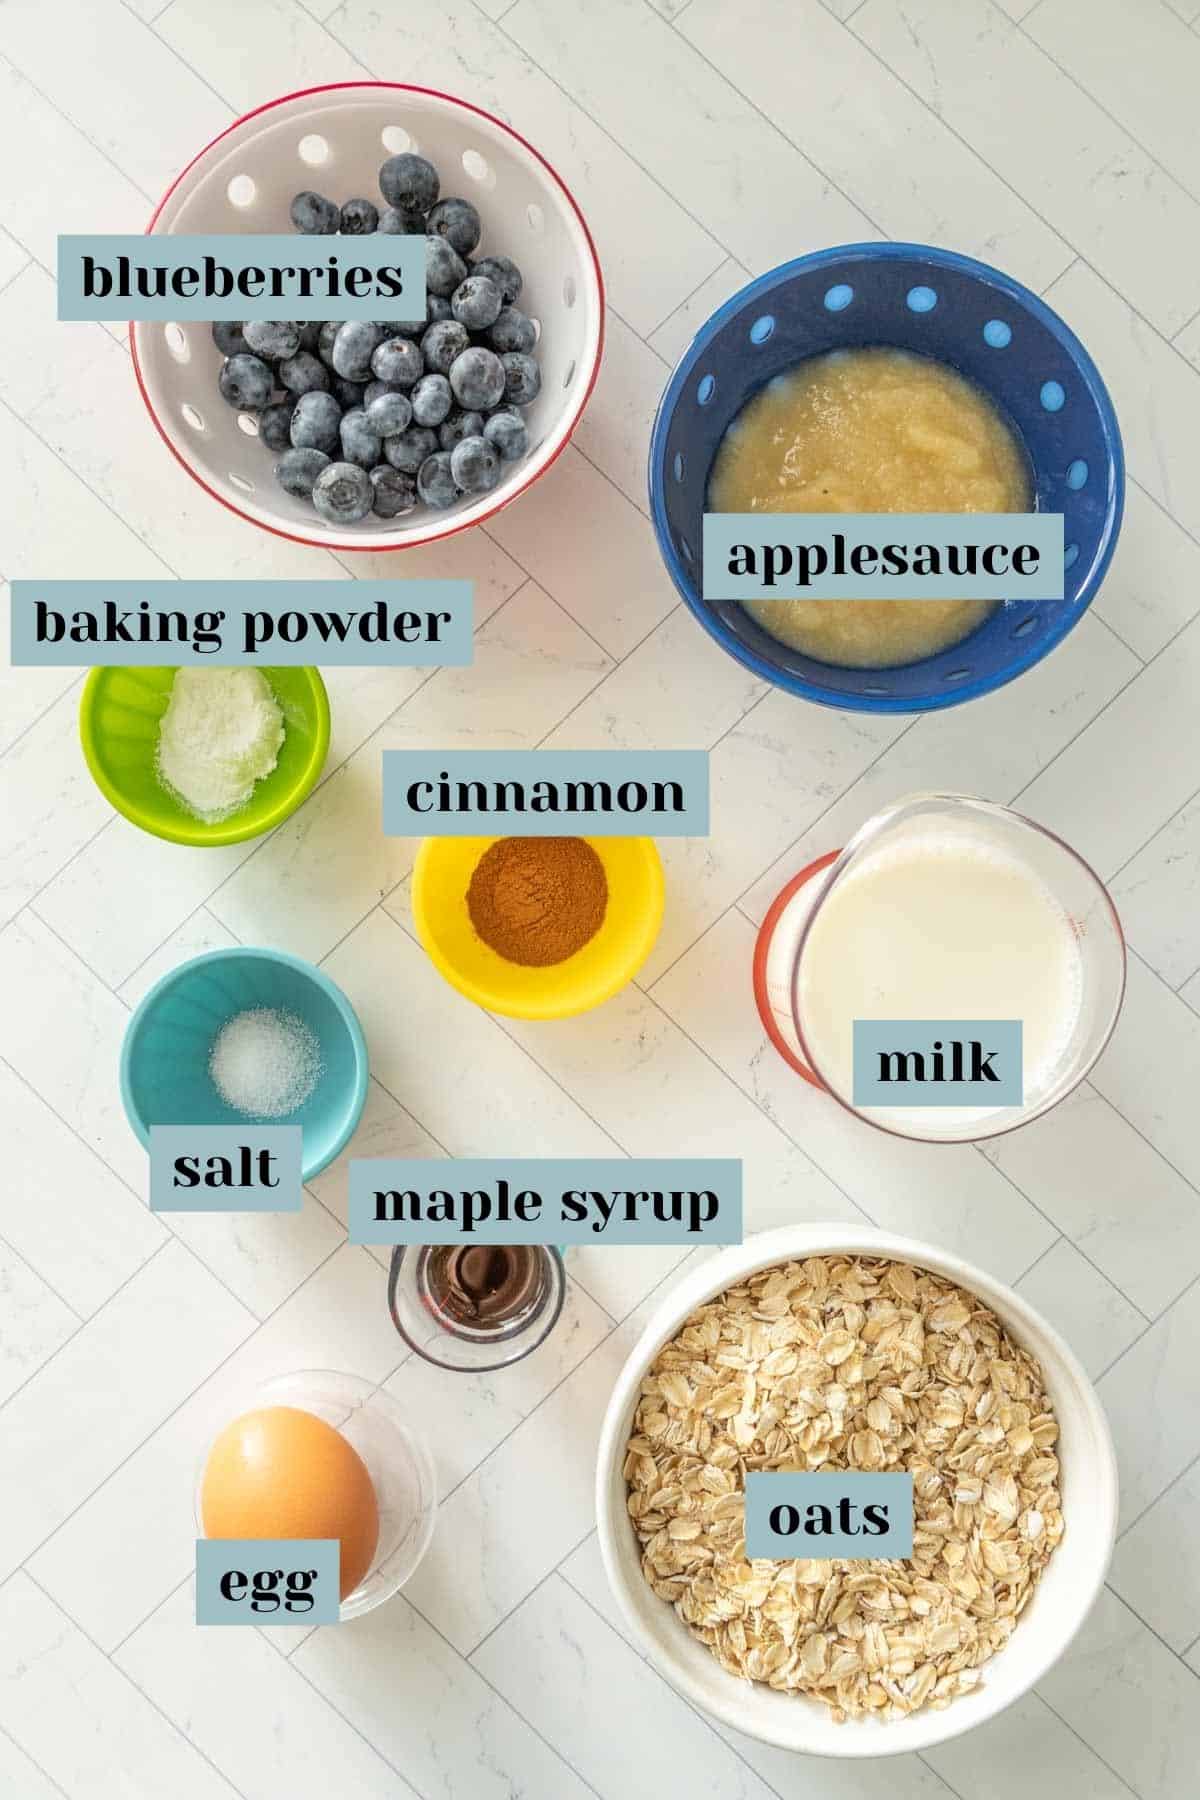 The ingredients for blueberry oatmeal are shown on a white marble countertop.